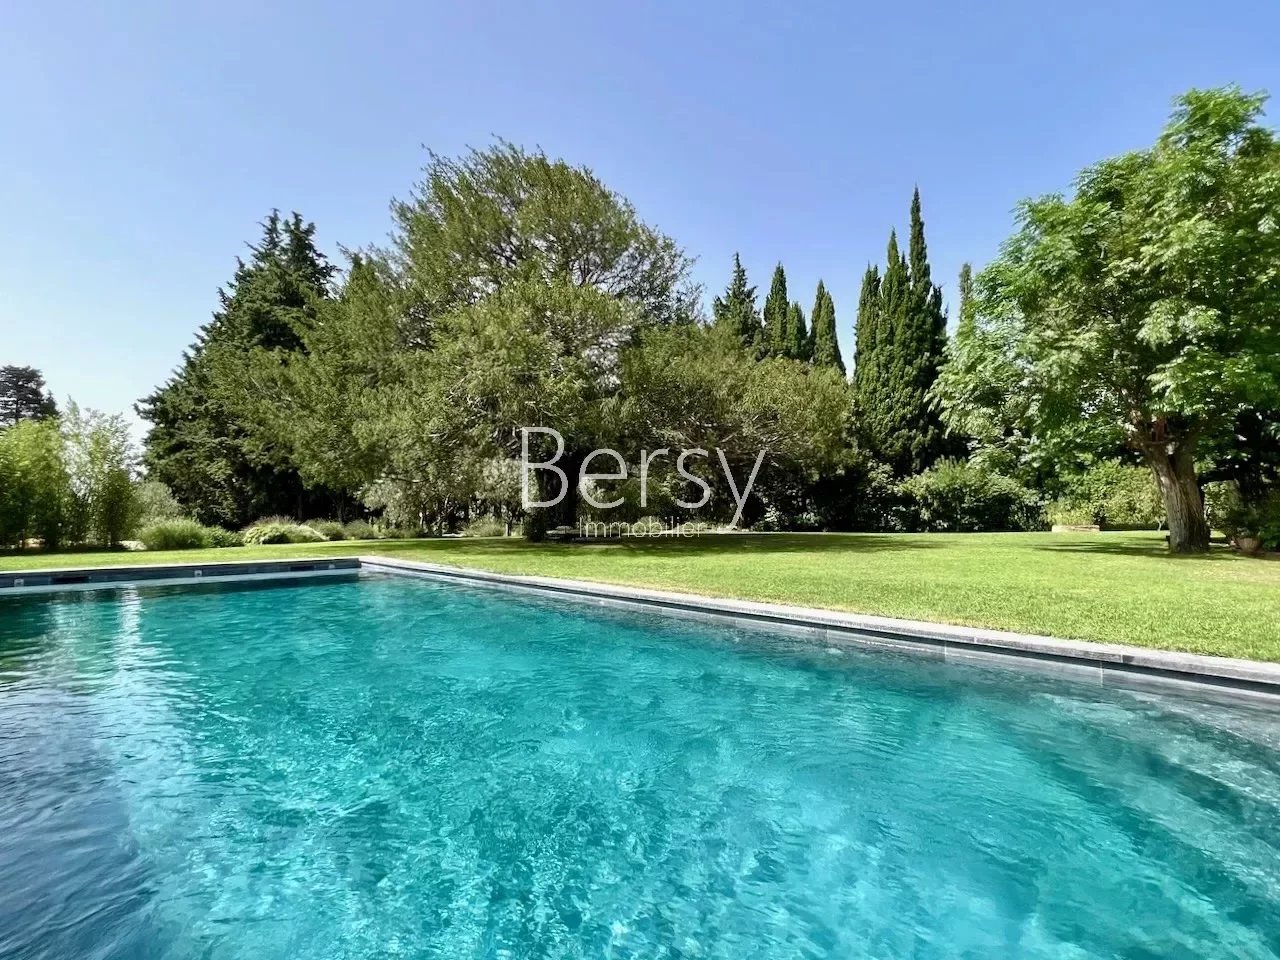 OPPORTUNITY - FULLY RENOVATED MAS - approximately 280m2 - 5 bedrooms - 9700m2 of land - Heated swimming pool of 5x10m